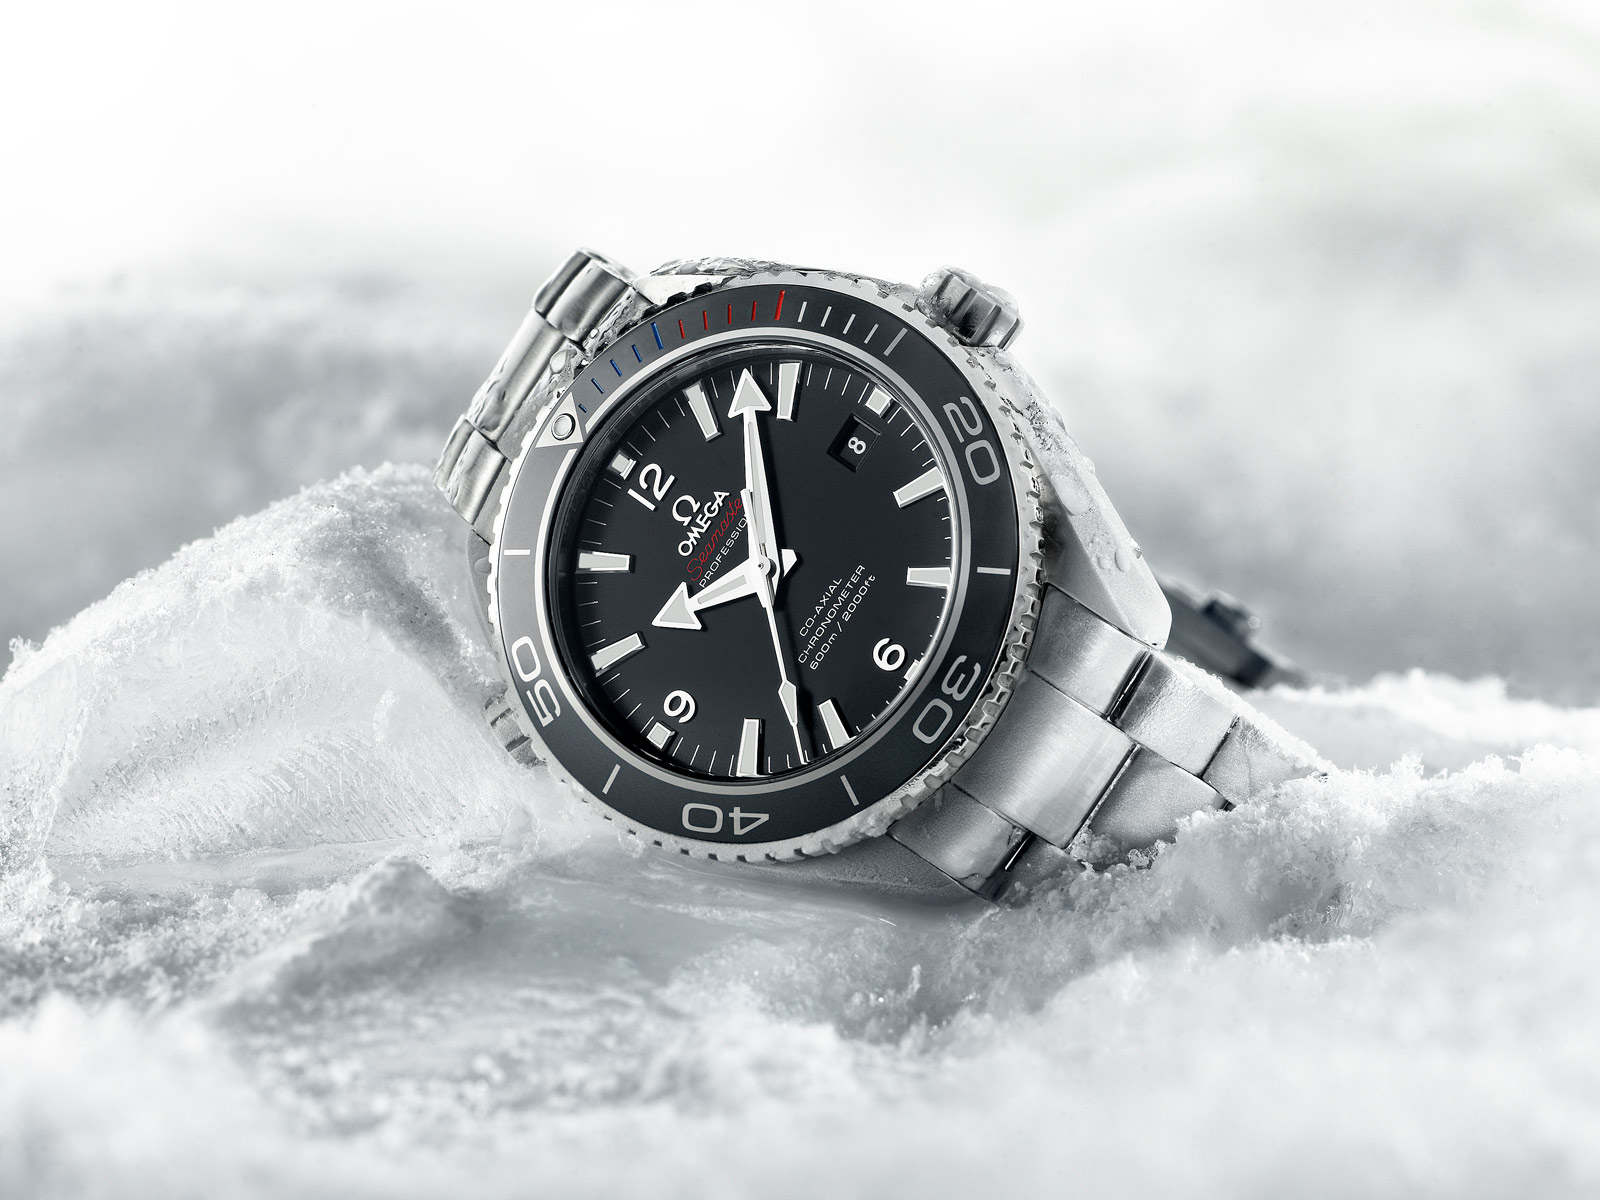 Review : Seamaster Planet Ocean Sochi 2014 Which Is The Model Of Replica Watches